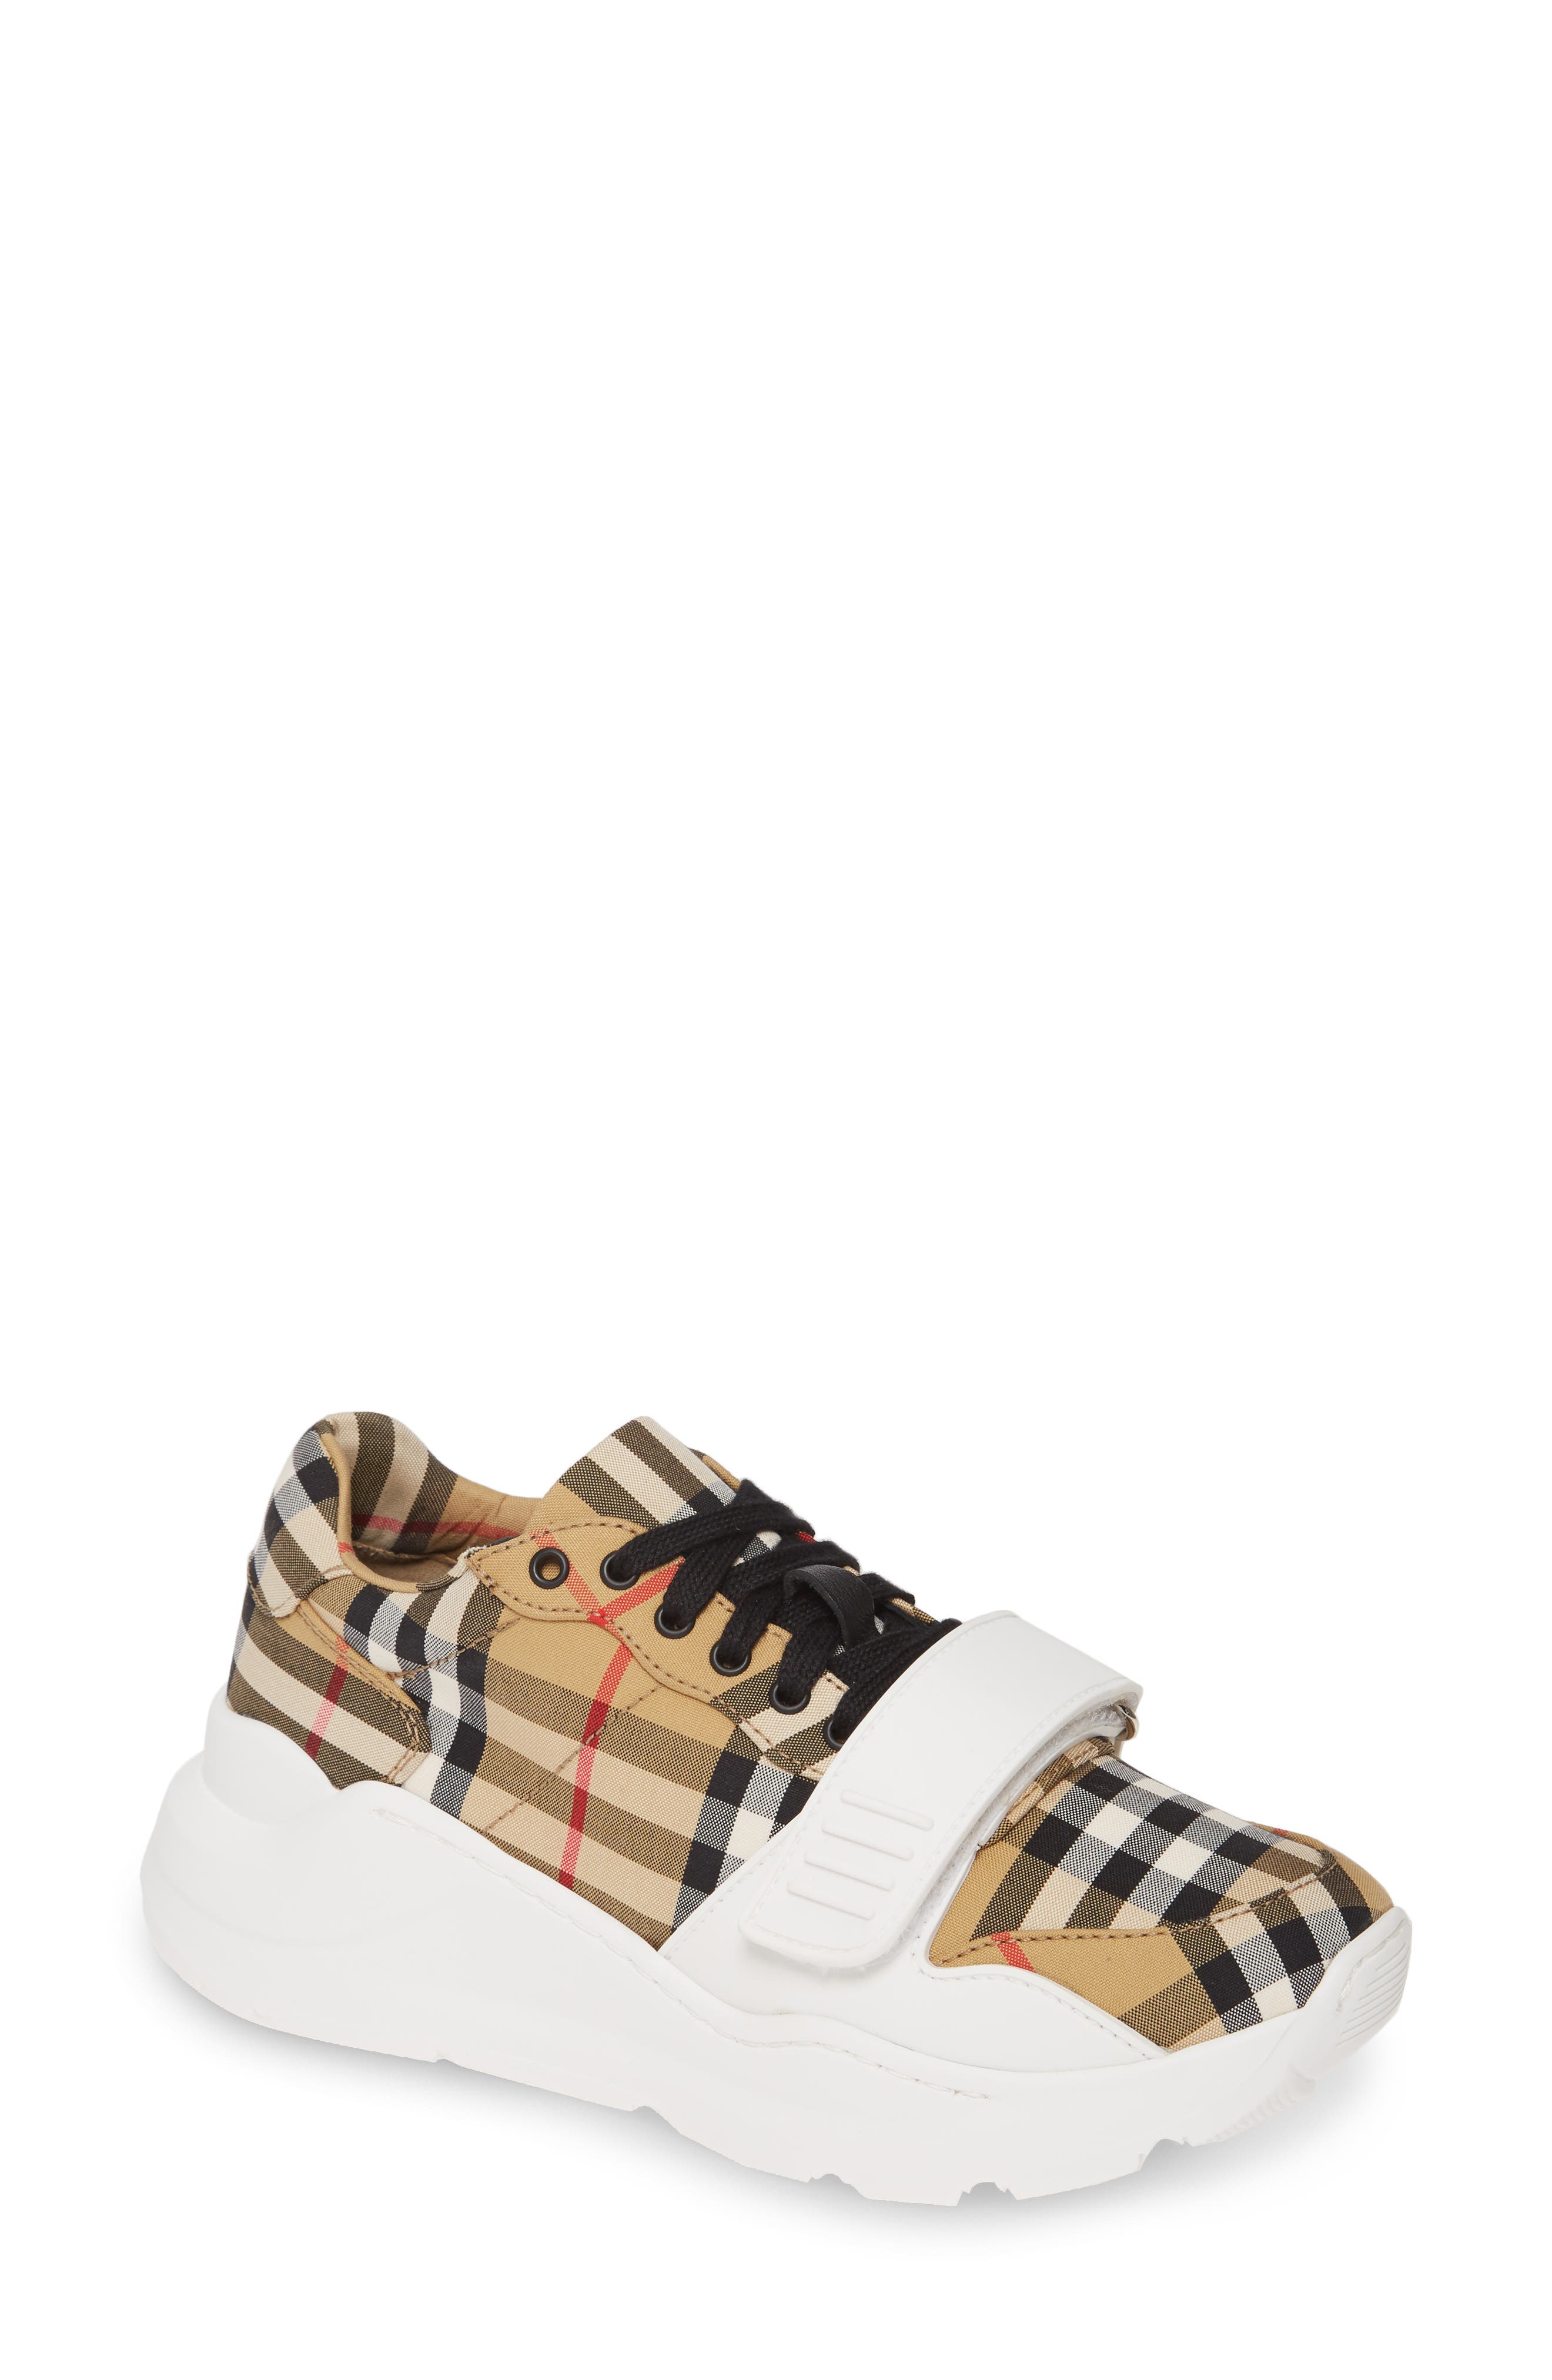 burberry sneakers womens price